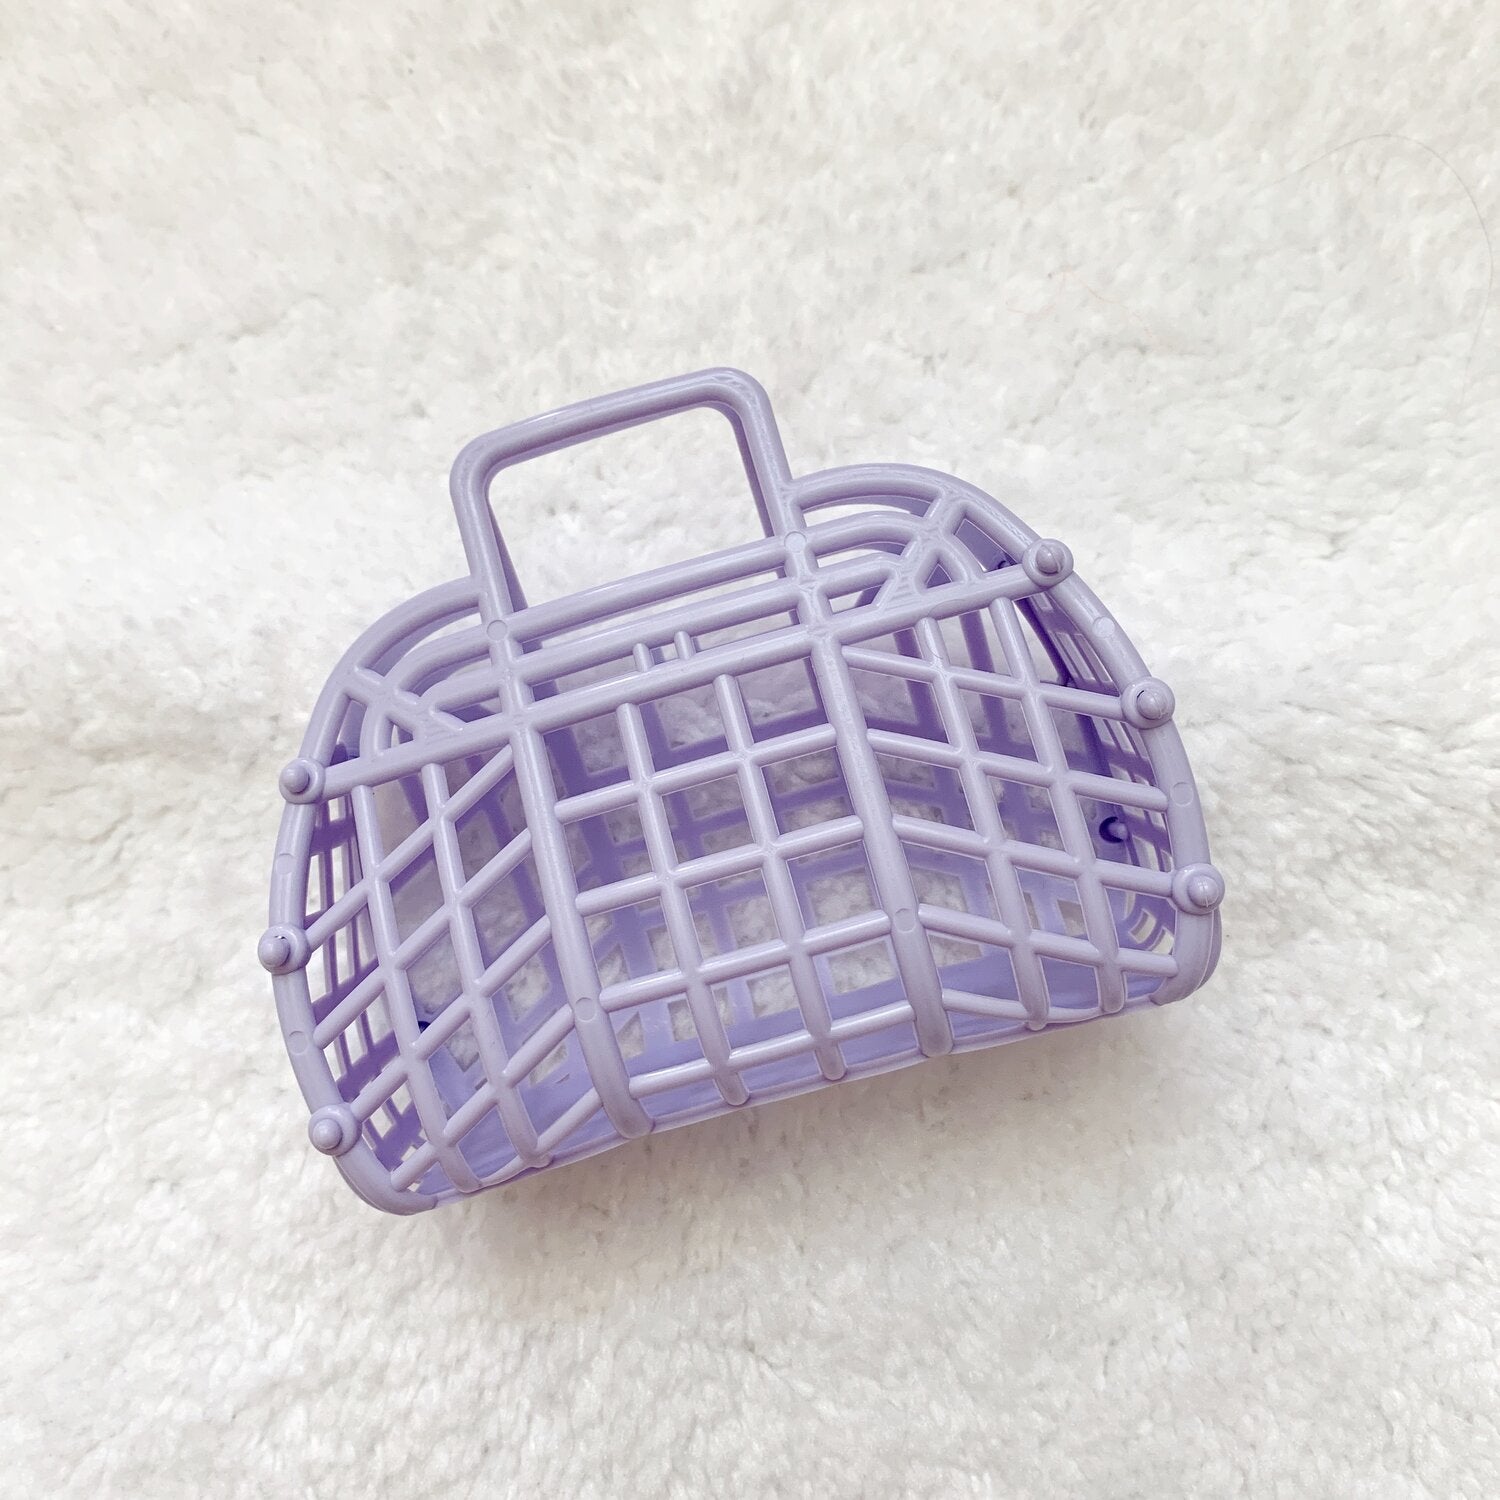 Lilac Itty Bitty Jelly Bag